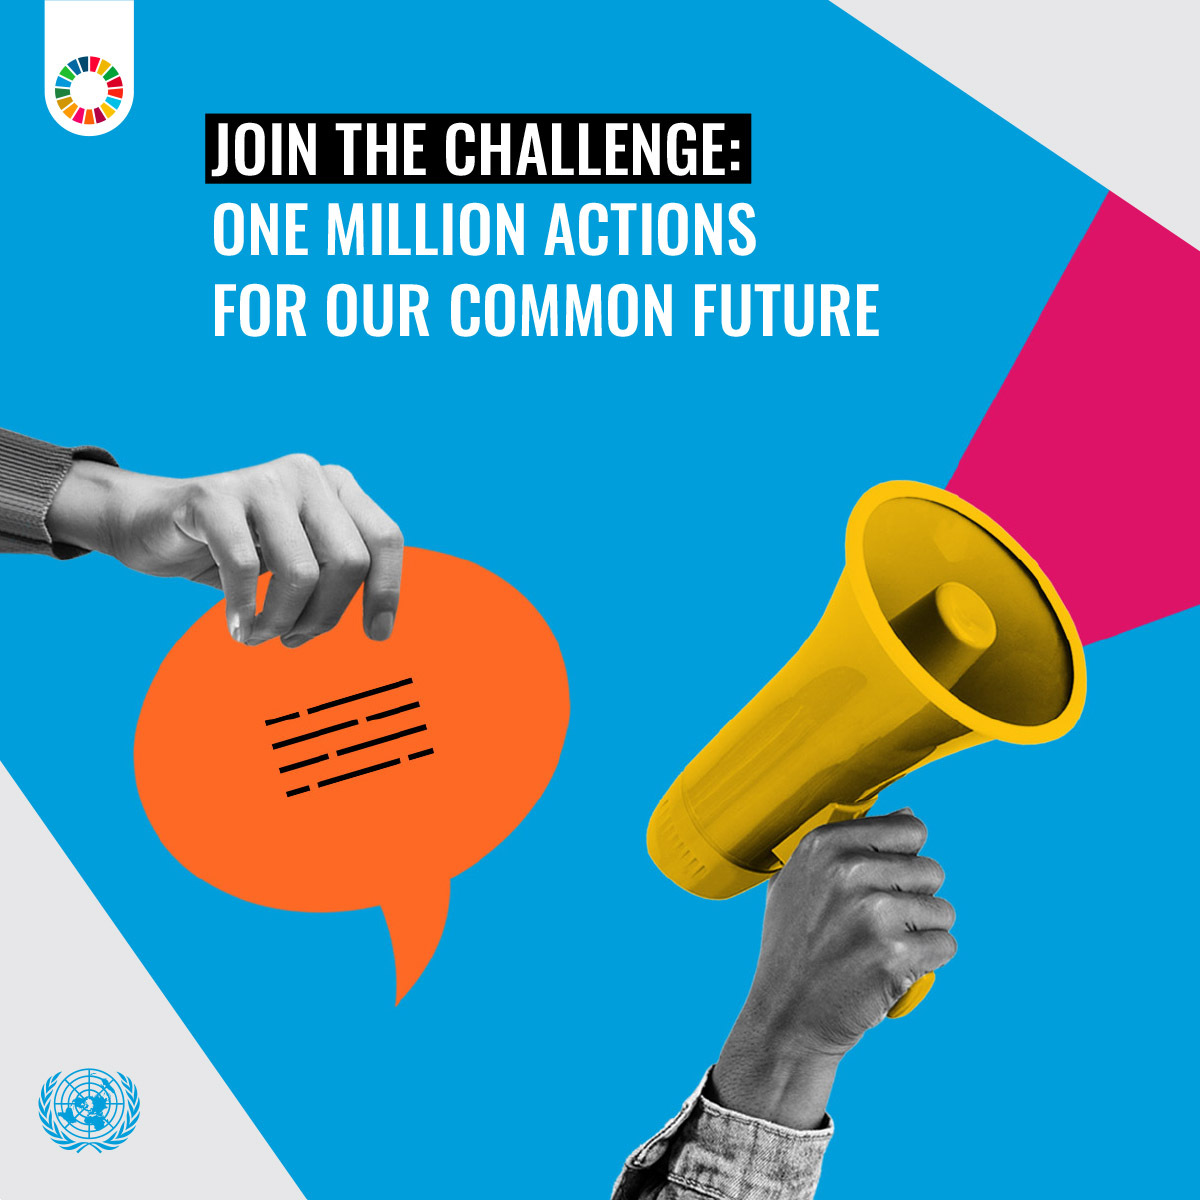 The Summit of the Future in September will determine the way forward for people and planet 🌎. We all have a part to play for #OurCommonFuture. Join the challenge and go to bit.ly/SoF24-challenge and see what you can do to speak up. 📣